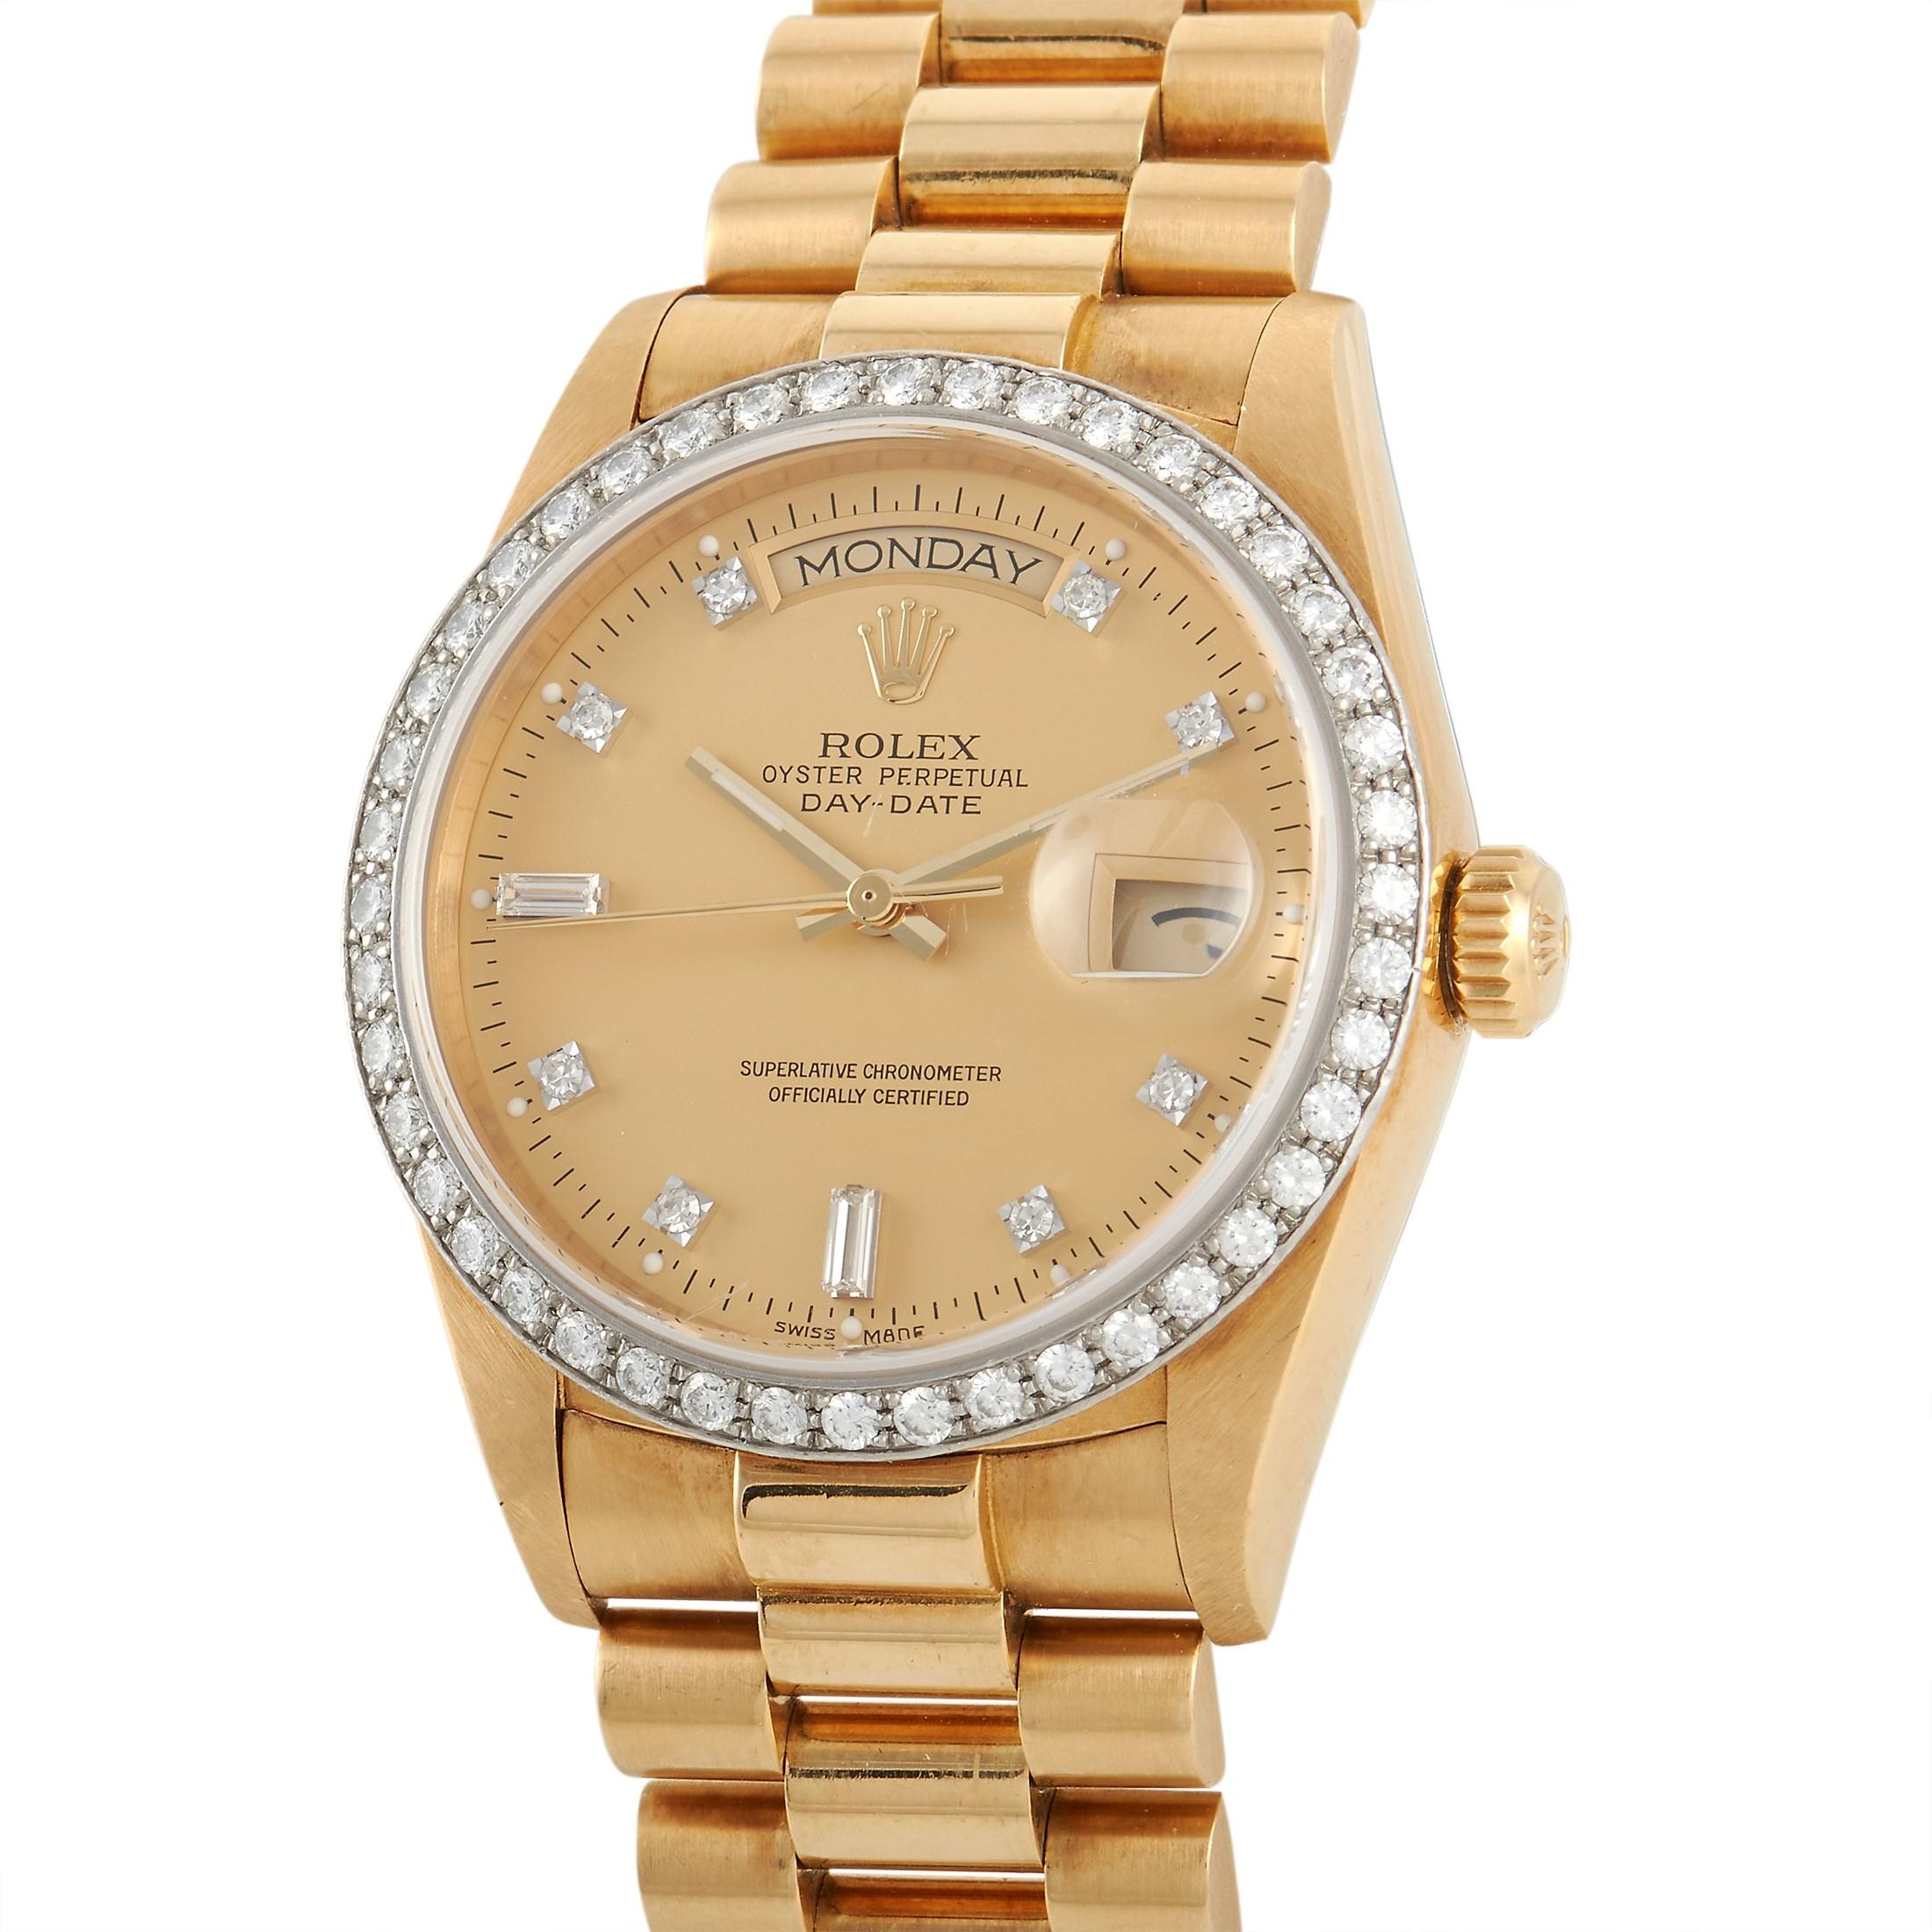 The Rolex Day-Date Diamond Watch, reference number 18048, is a luxury timepiece that requires no introduction. 

Crafted from precious materials, this watch includes a 42mm case, bracelet, and bezel made from 18K Yellow Gold - but what truly sets